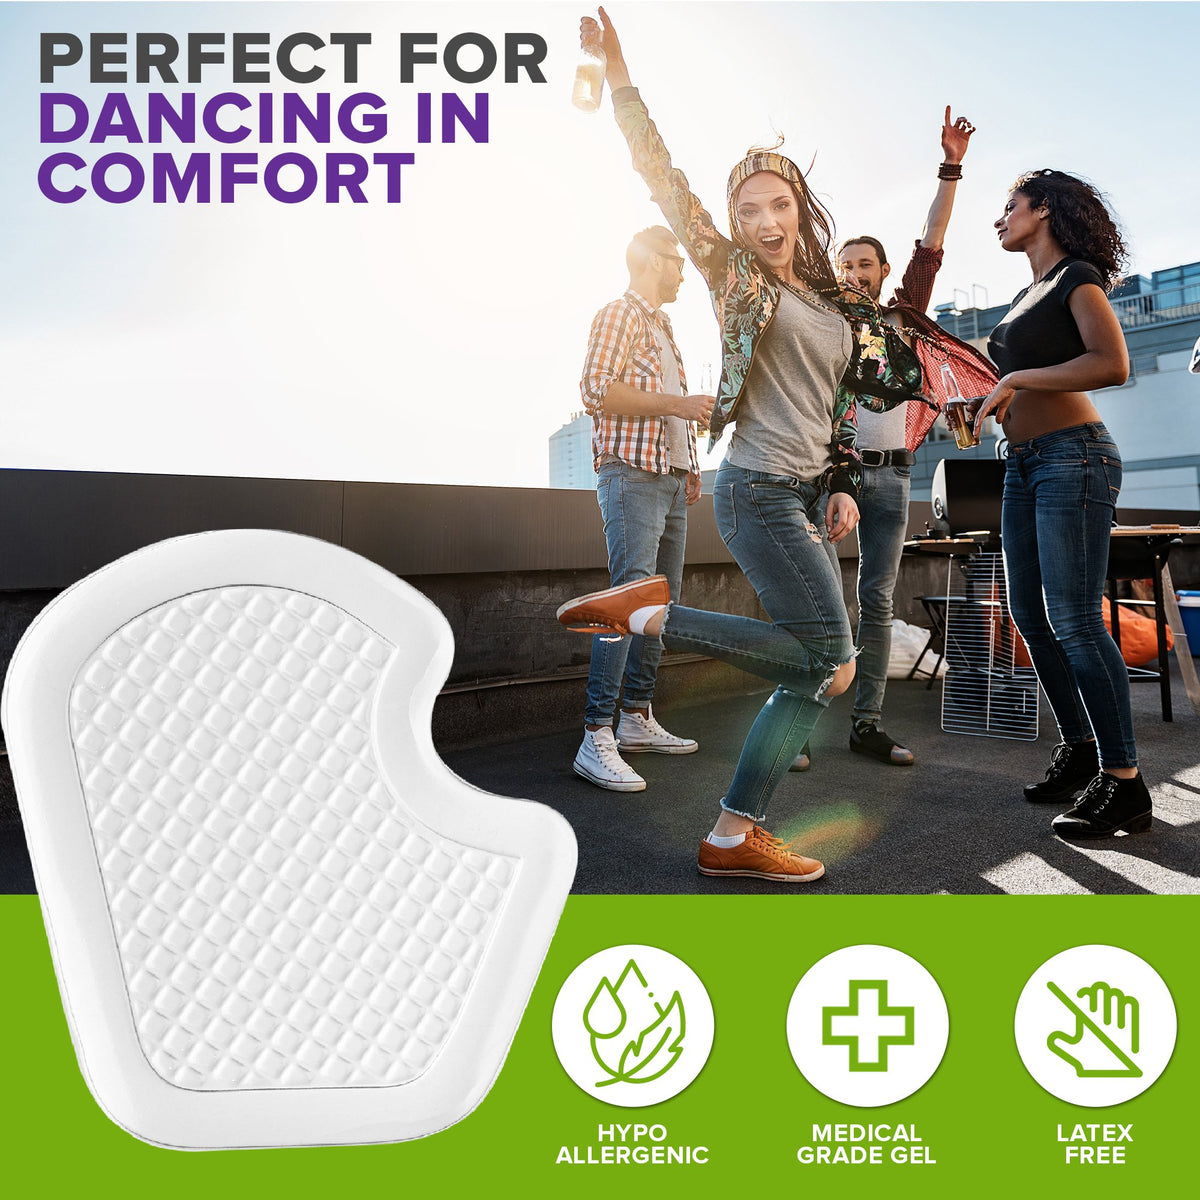 Mars Wellness Dancers Pads for Feet – Premium Gel Cushion Foot Pad Designed to Help Protect & Relieve Metatarsal, Sesamoid & Ball of Foot Pain – Strong Adhesive Backing – 2 Pairs